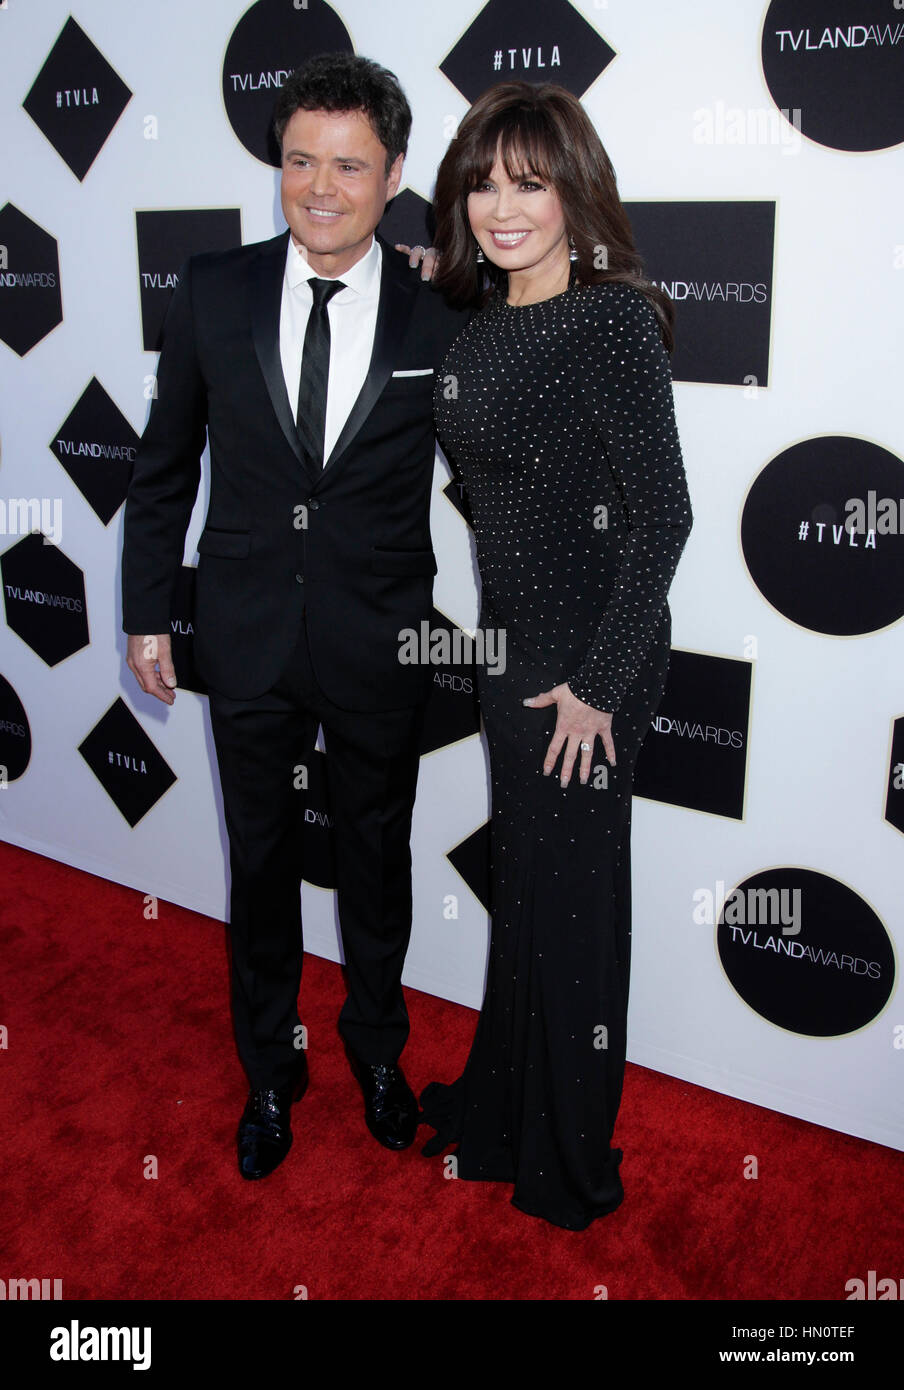 Donny Osmond and Marie Osmond arrive at the TV Land Awards on April 11, 2015 in Beverly Hills, California. Photo by Francis Specker Stock Photo